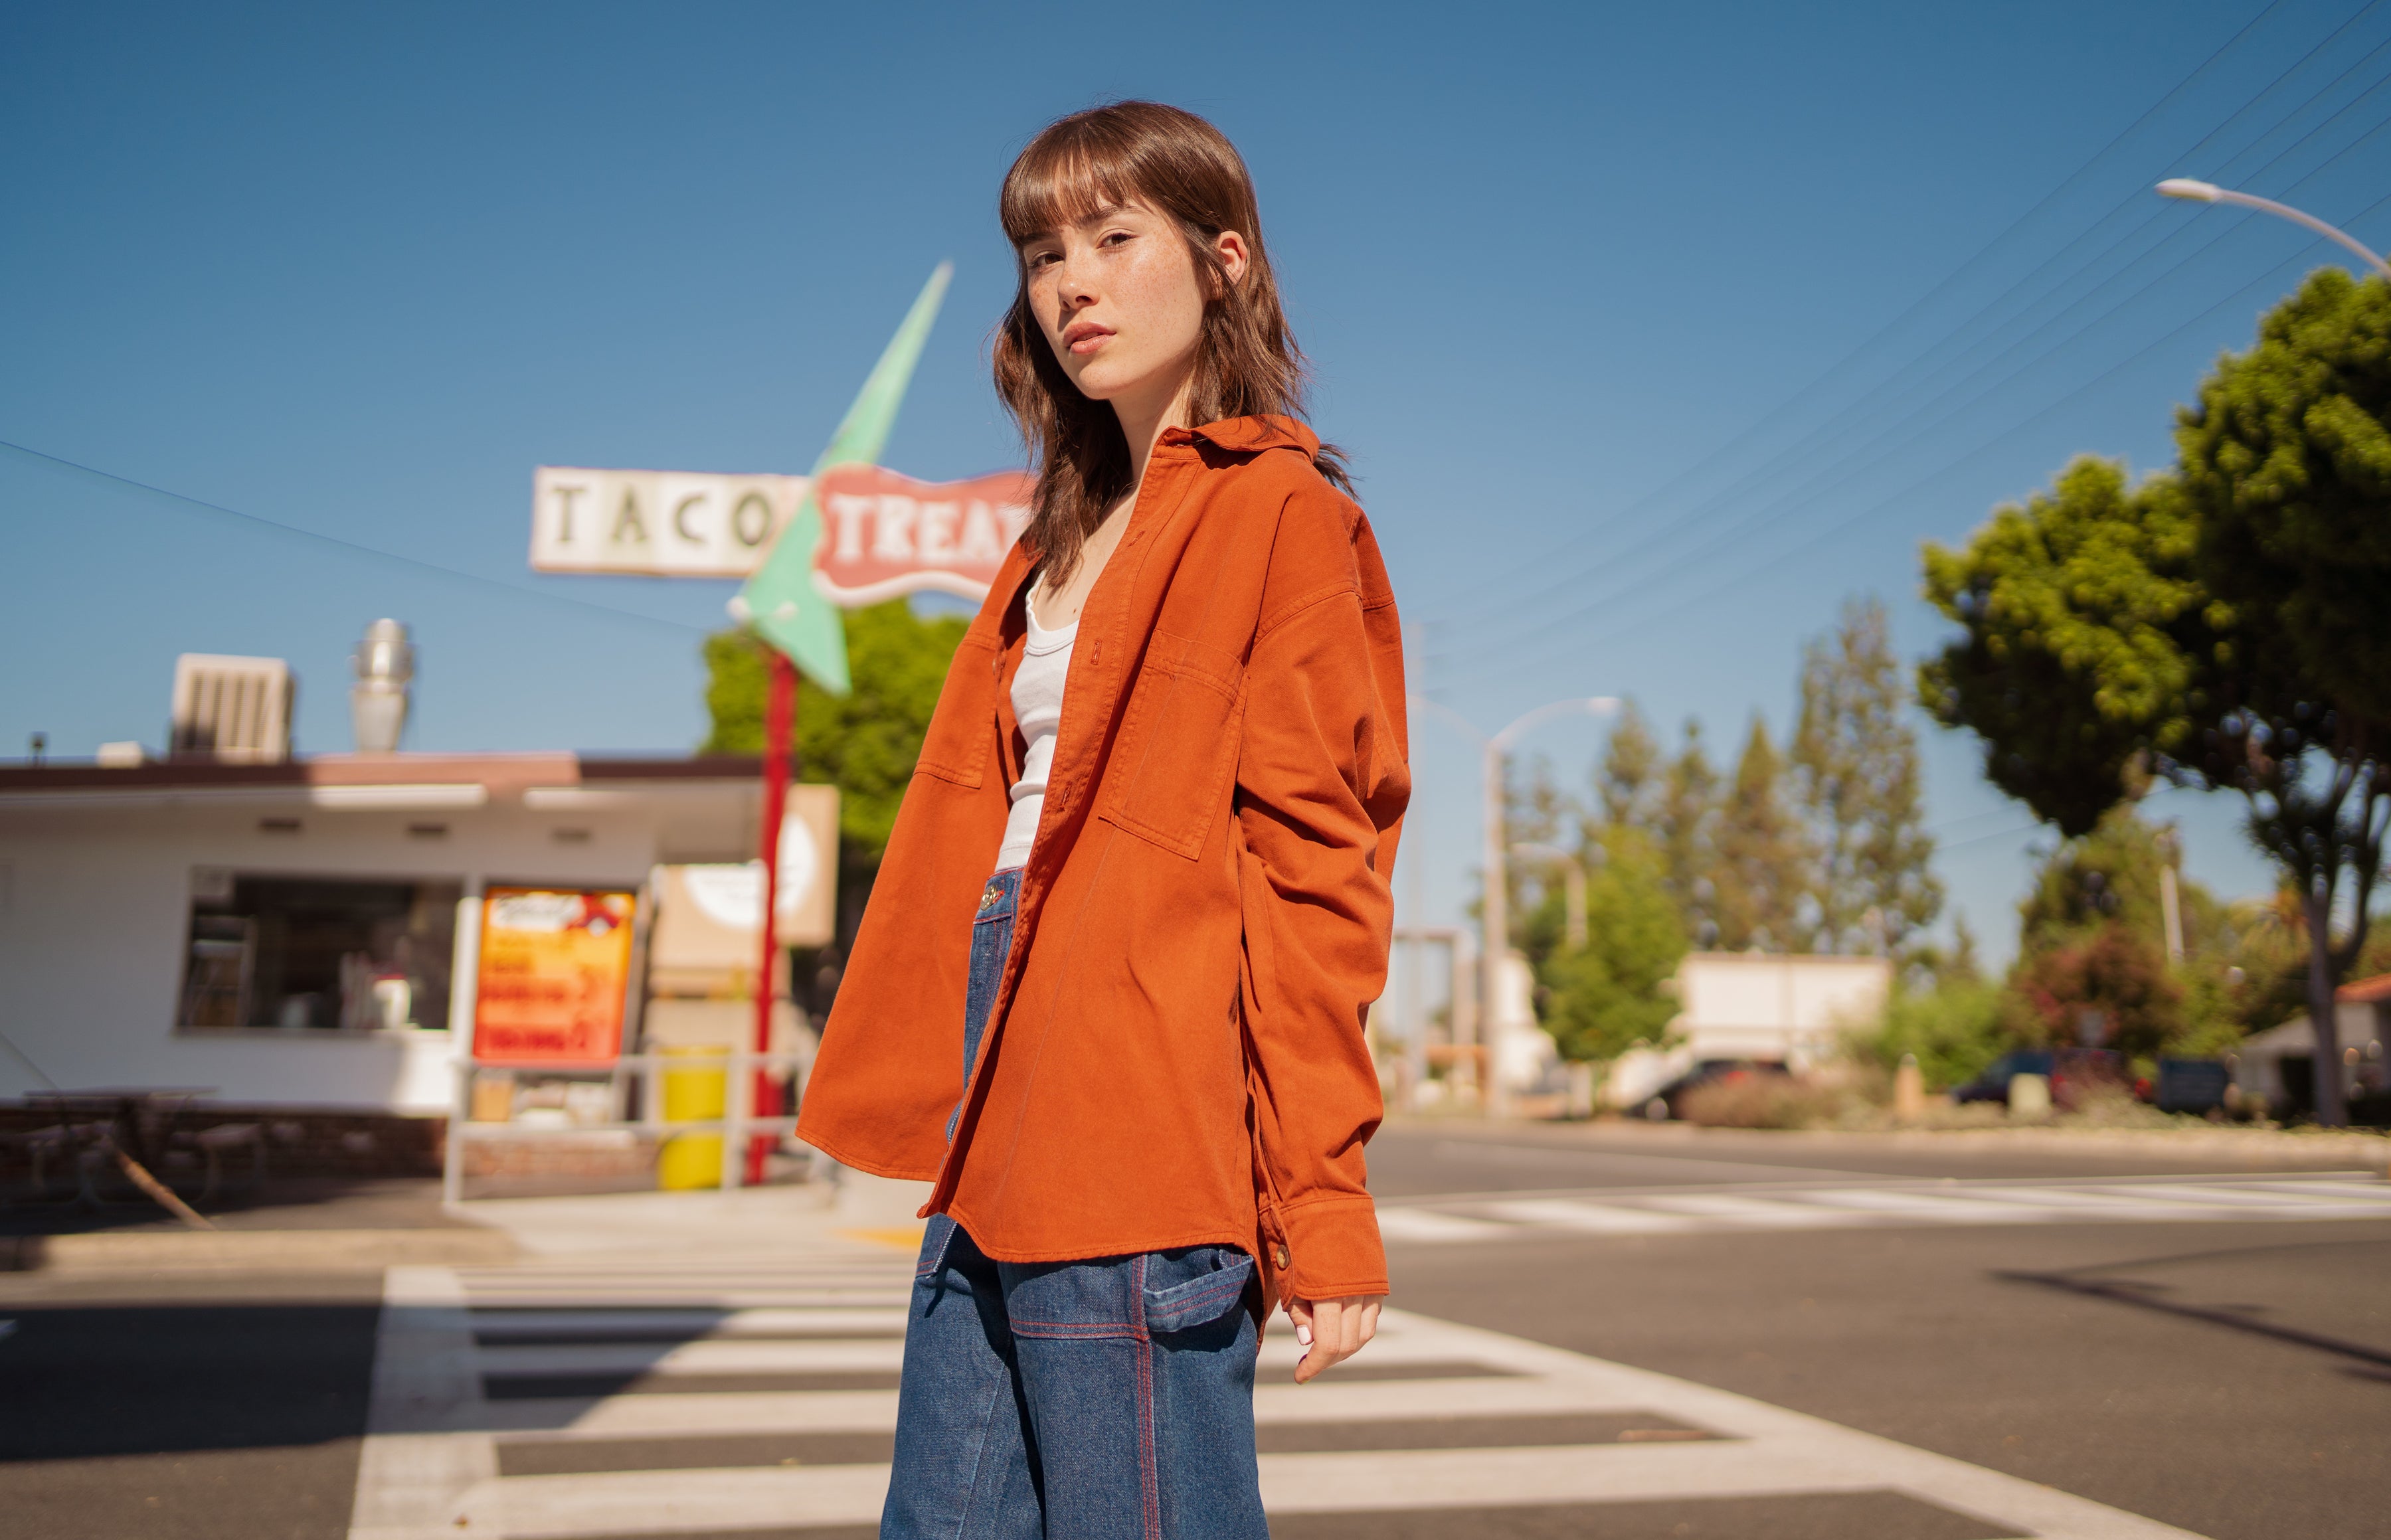 Hana is wearing Oversize Overshirt in Burnt Terracotta, Cropped Tank Top in Vintage Off-White and Carpenter Jeans in Dark Denim